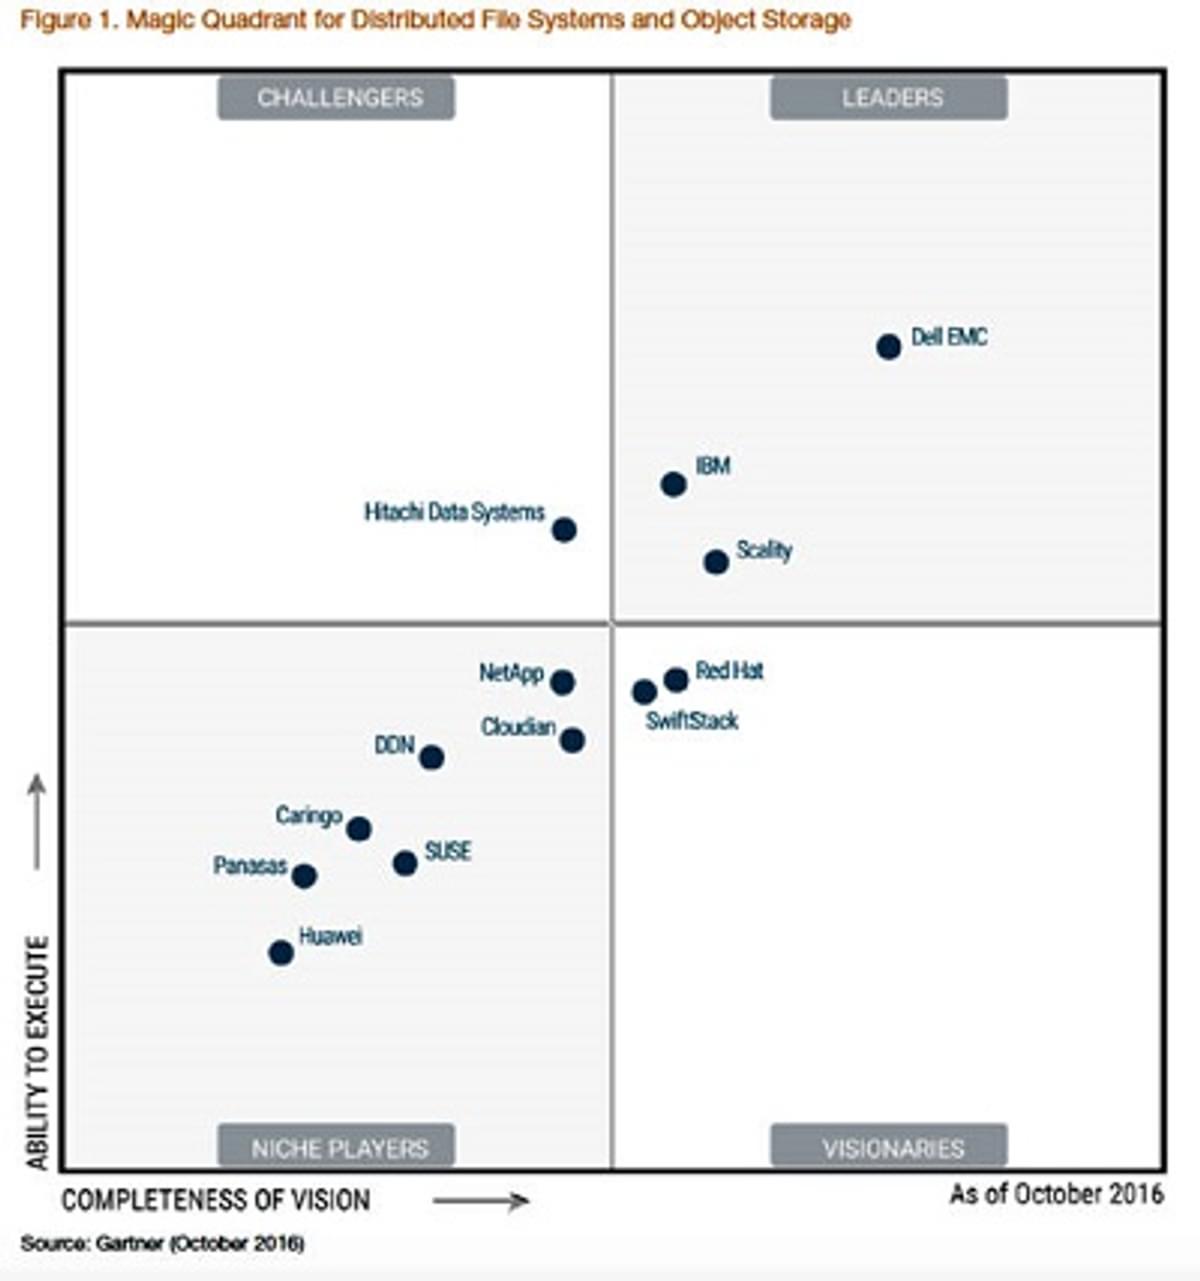 Dell EMC leidt Gartner Magic Quadrant for Distributed File Systems and Object Storage image